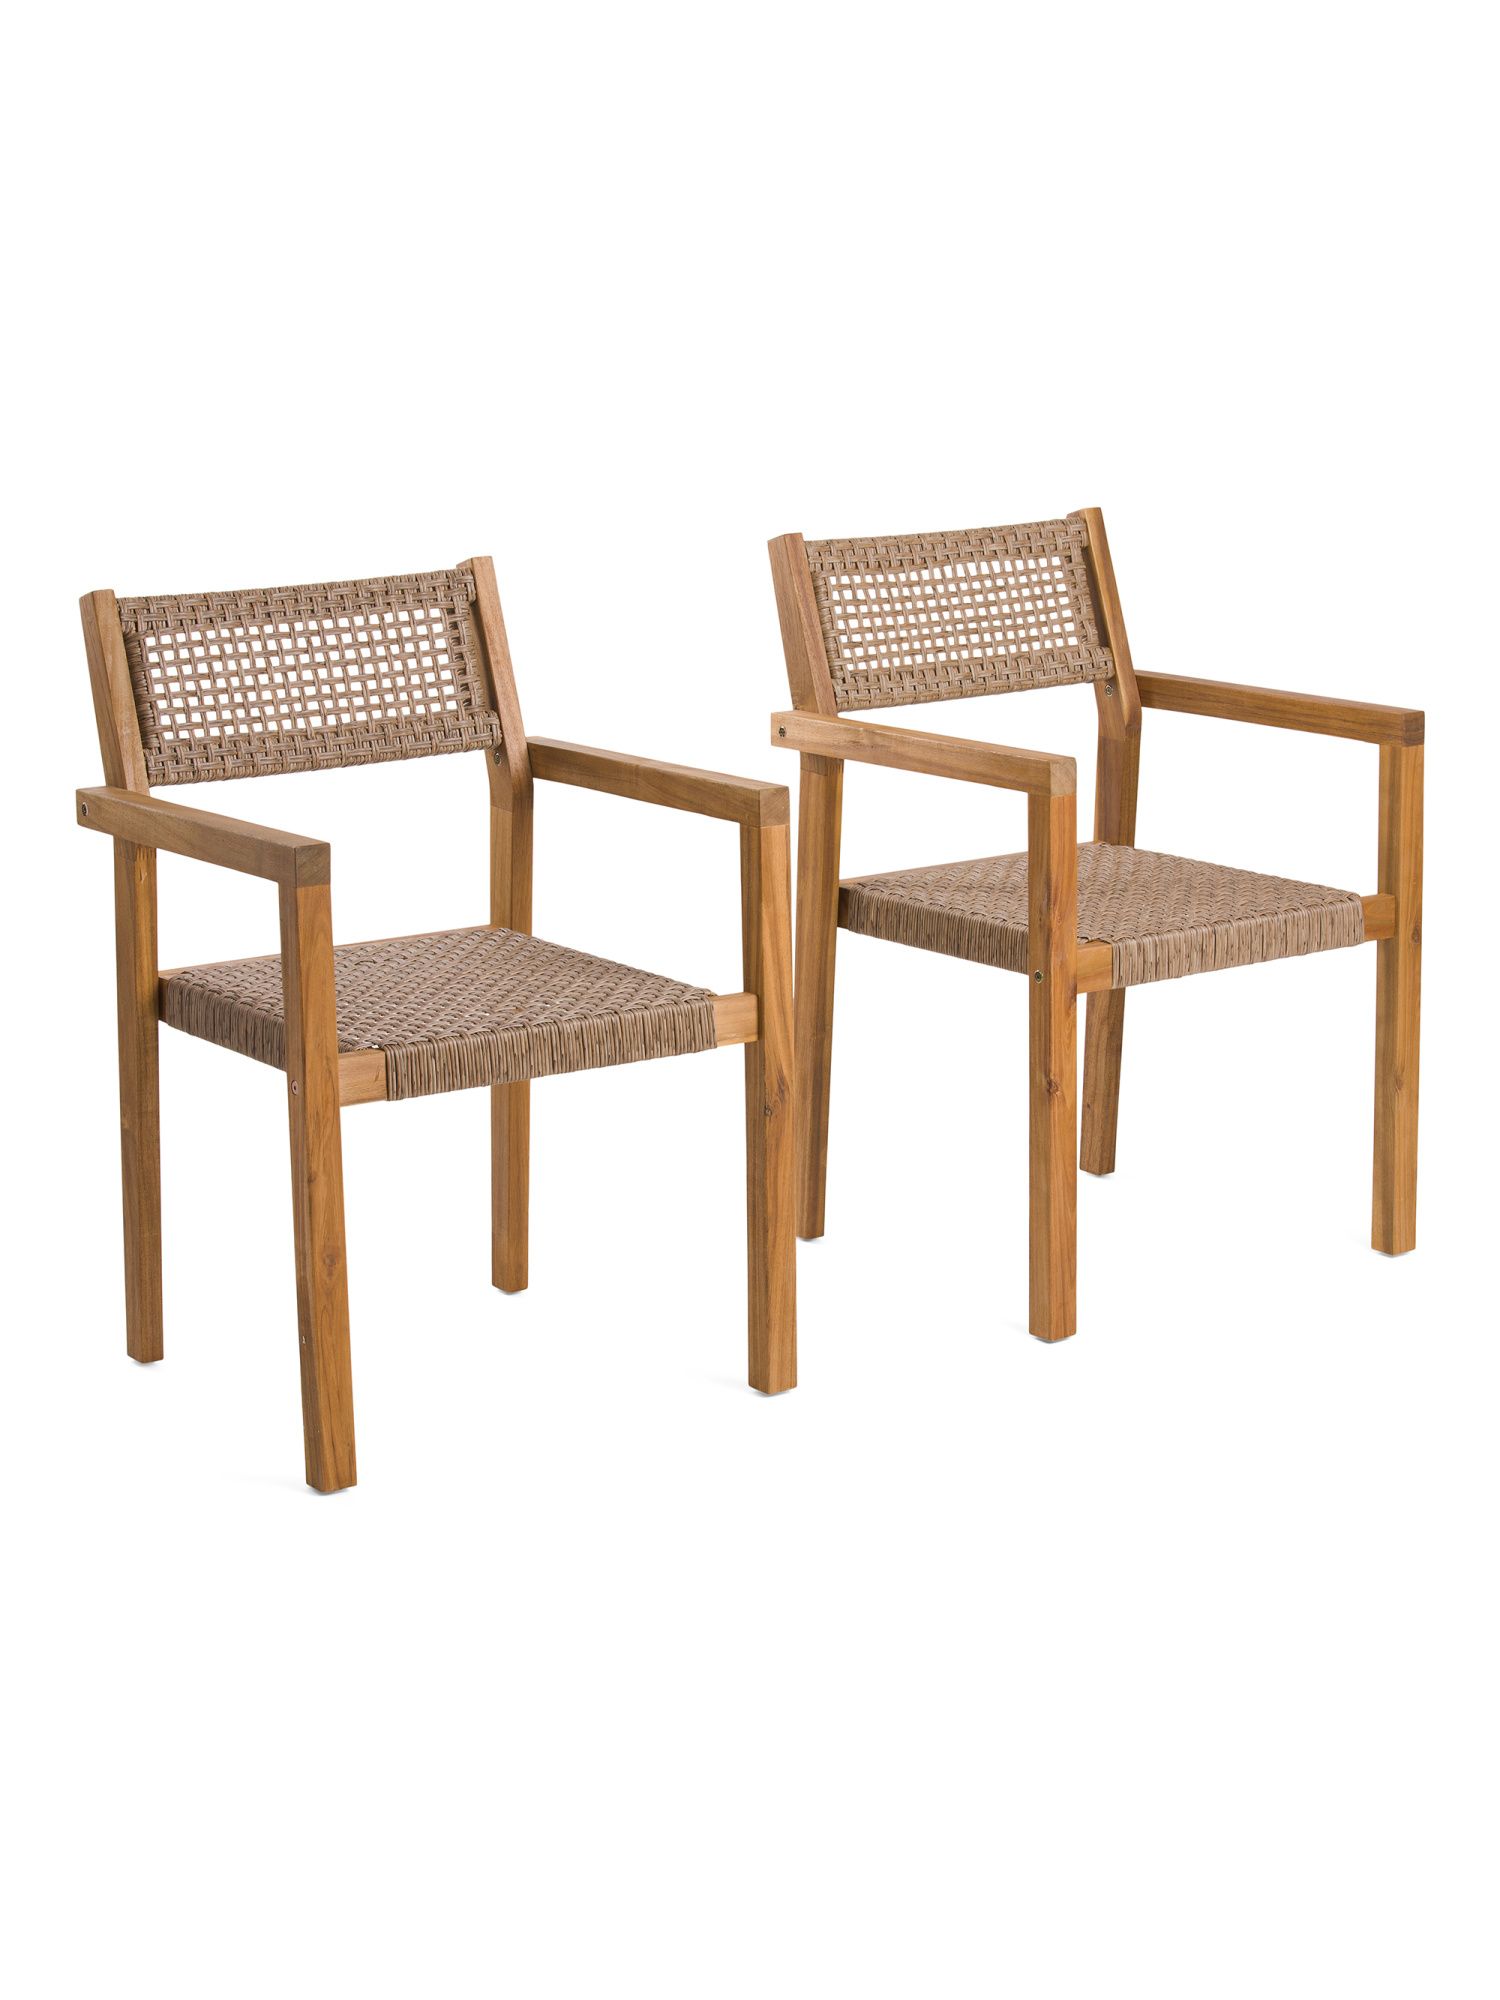 Set Of 2 Outdoor Dining Chairs | Home | T.J.Maxx | TJ Maxx